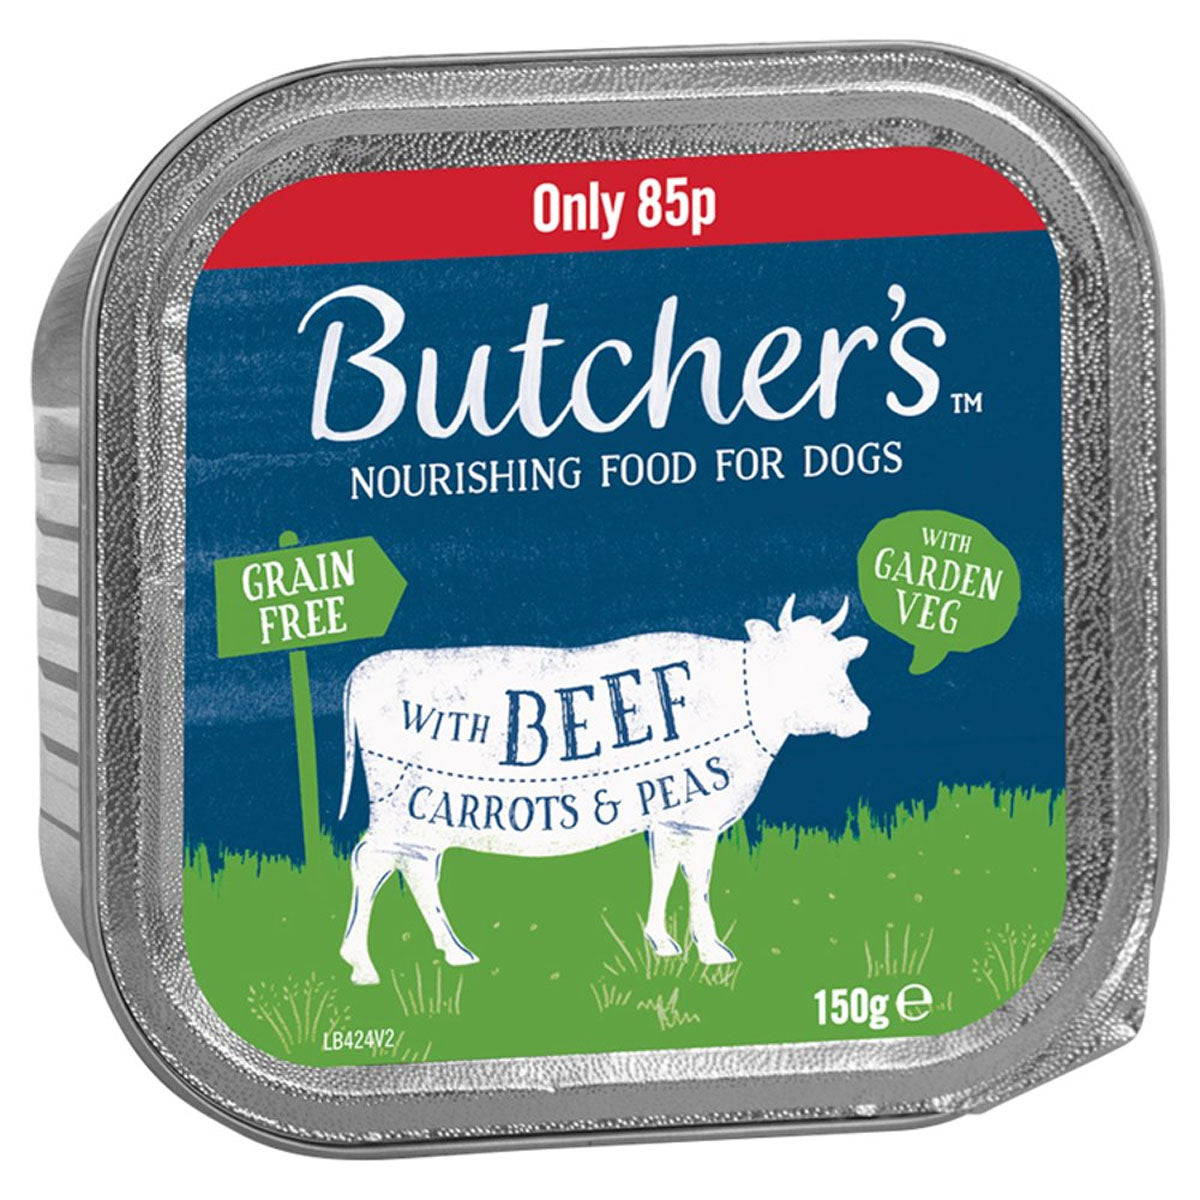 Butcher's - Beef & Veg Dog Food Tray - 150g - Continental Food Store